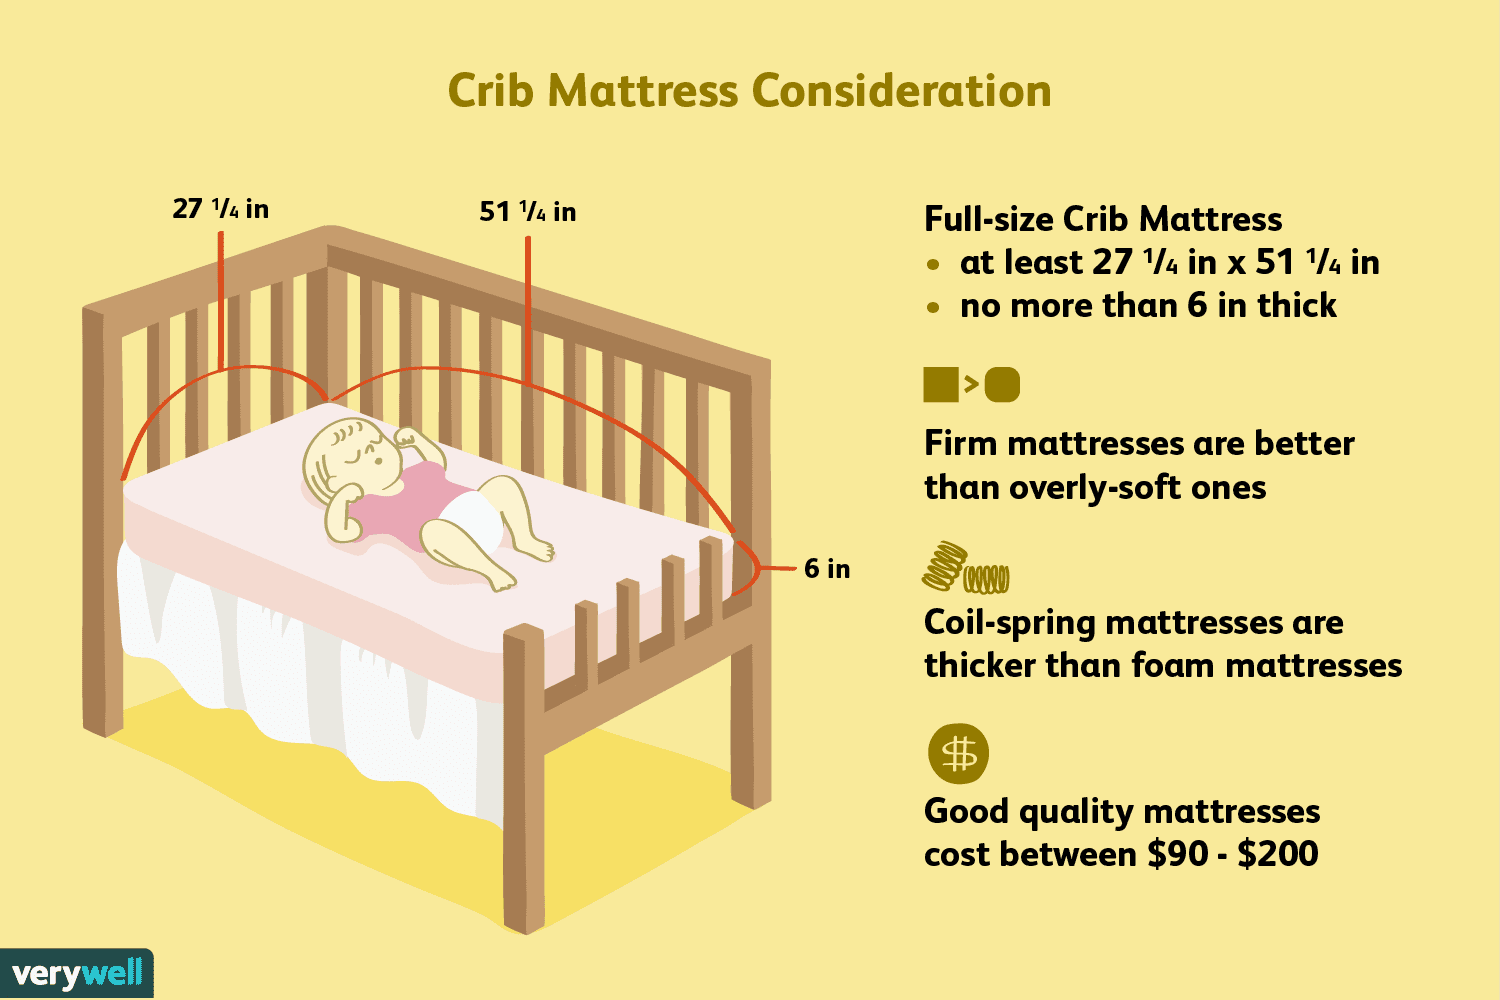 A Parent's Guide to Buying the Right Crib Mattress